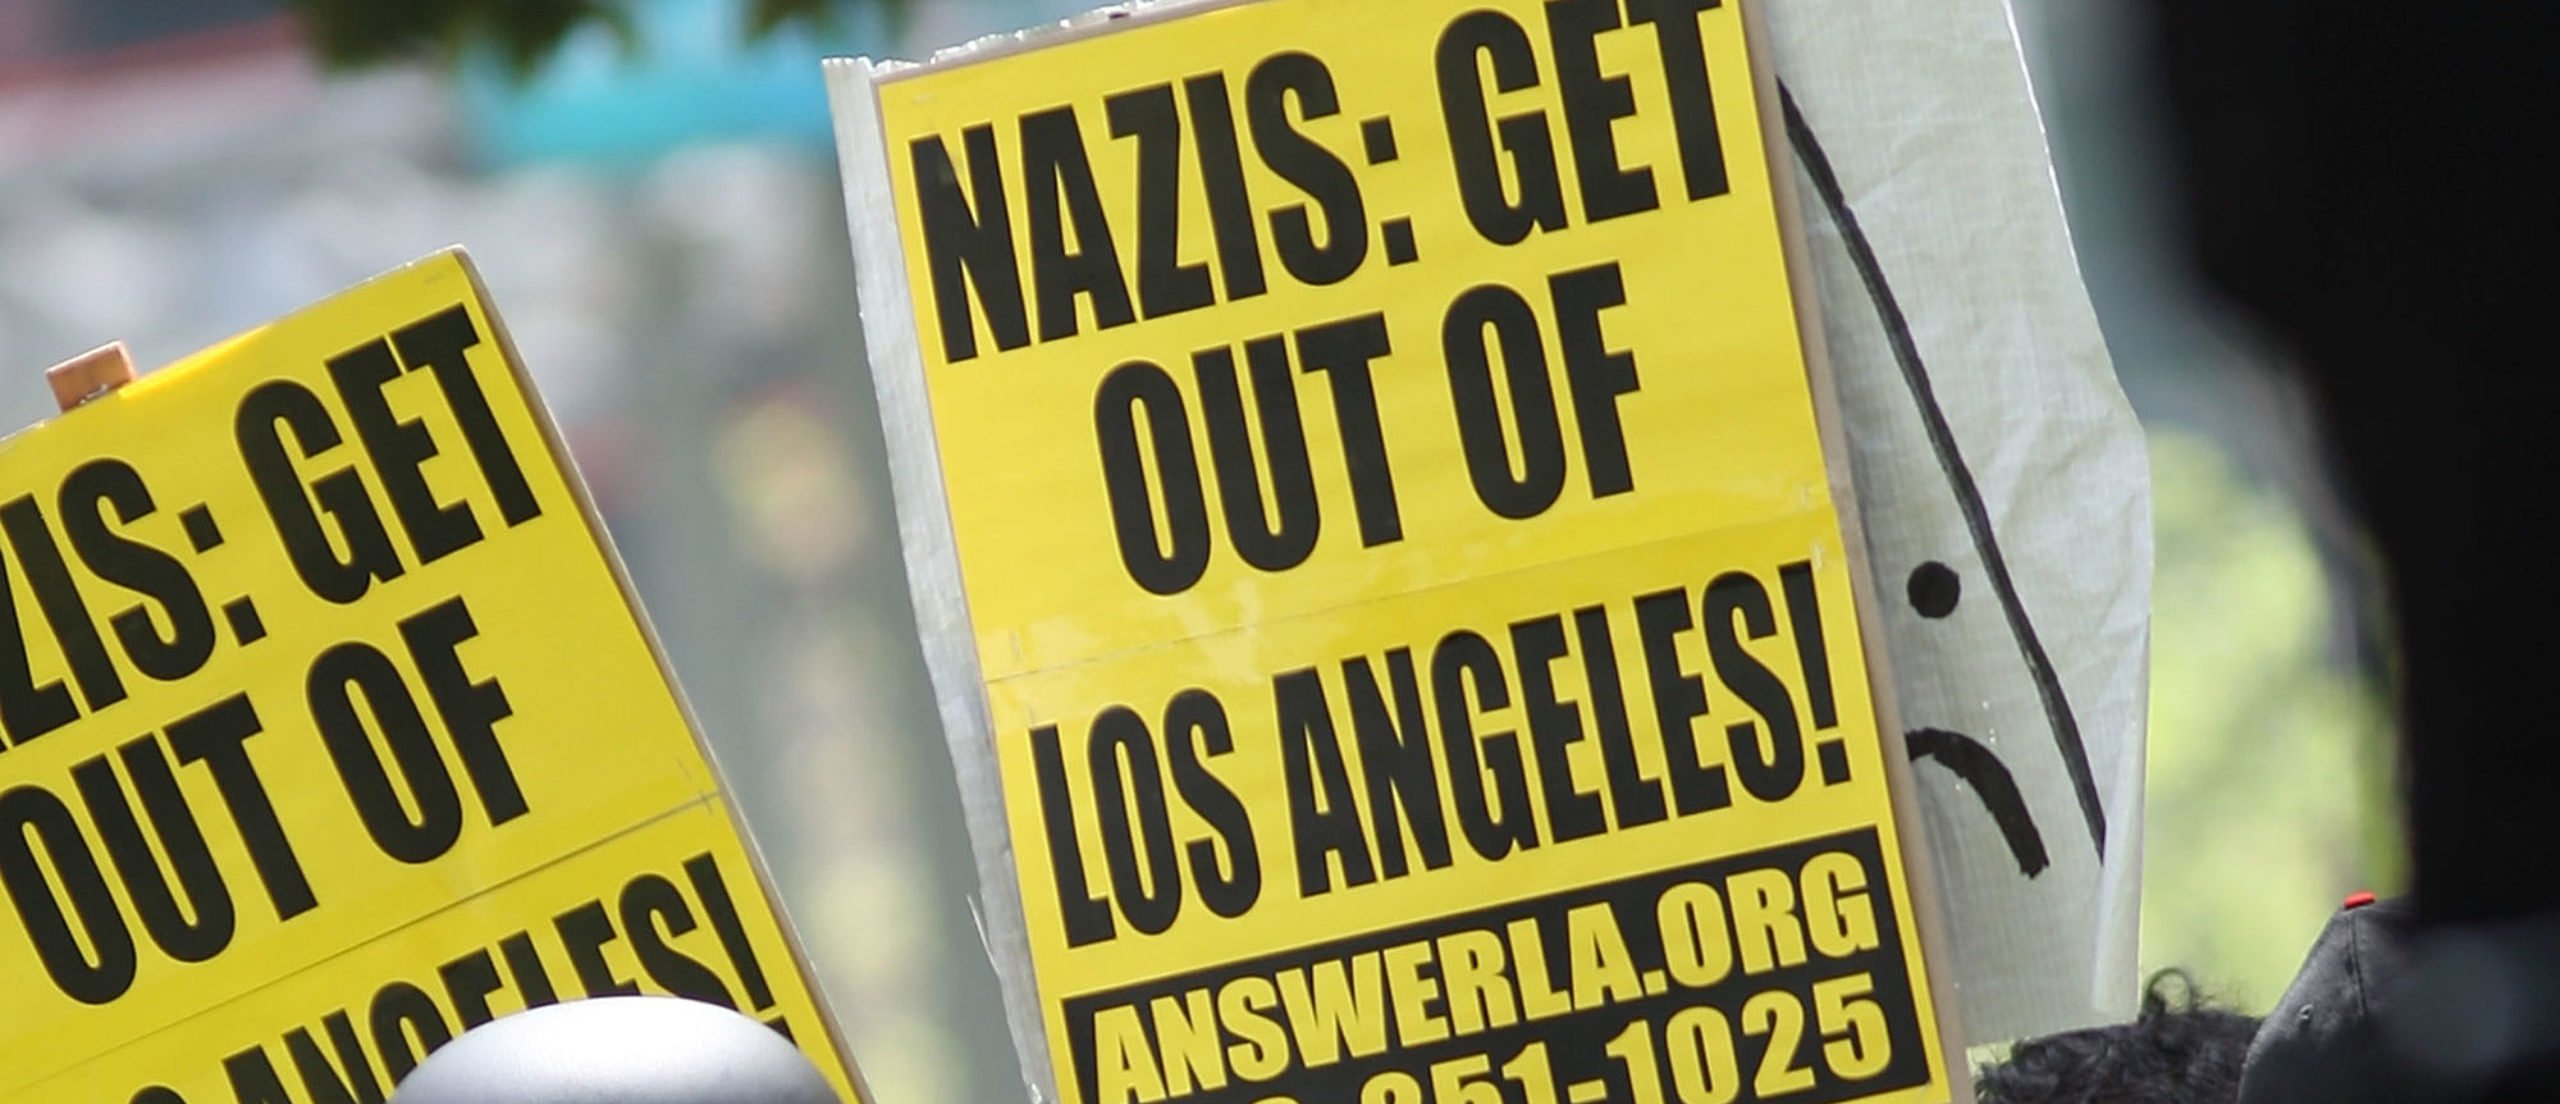 Los Angeles Council Asks City To Adopt Antisemitism Resolution